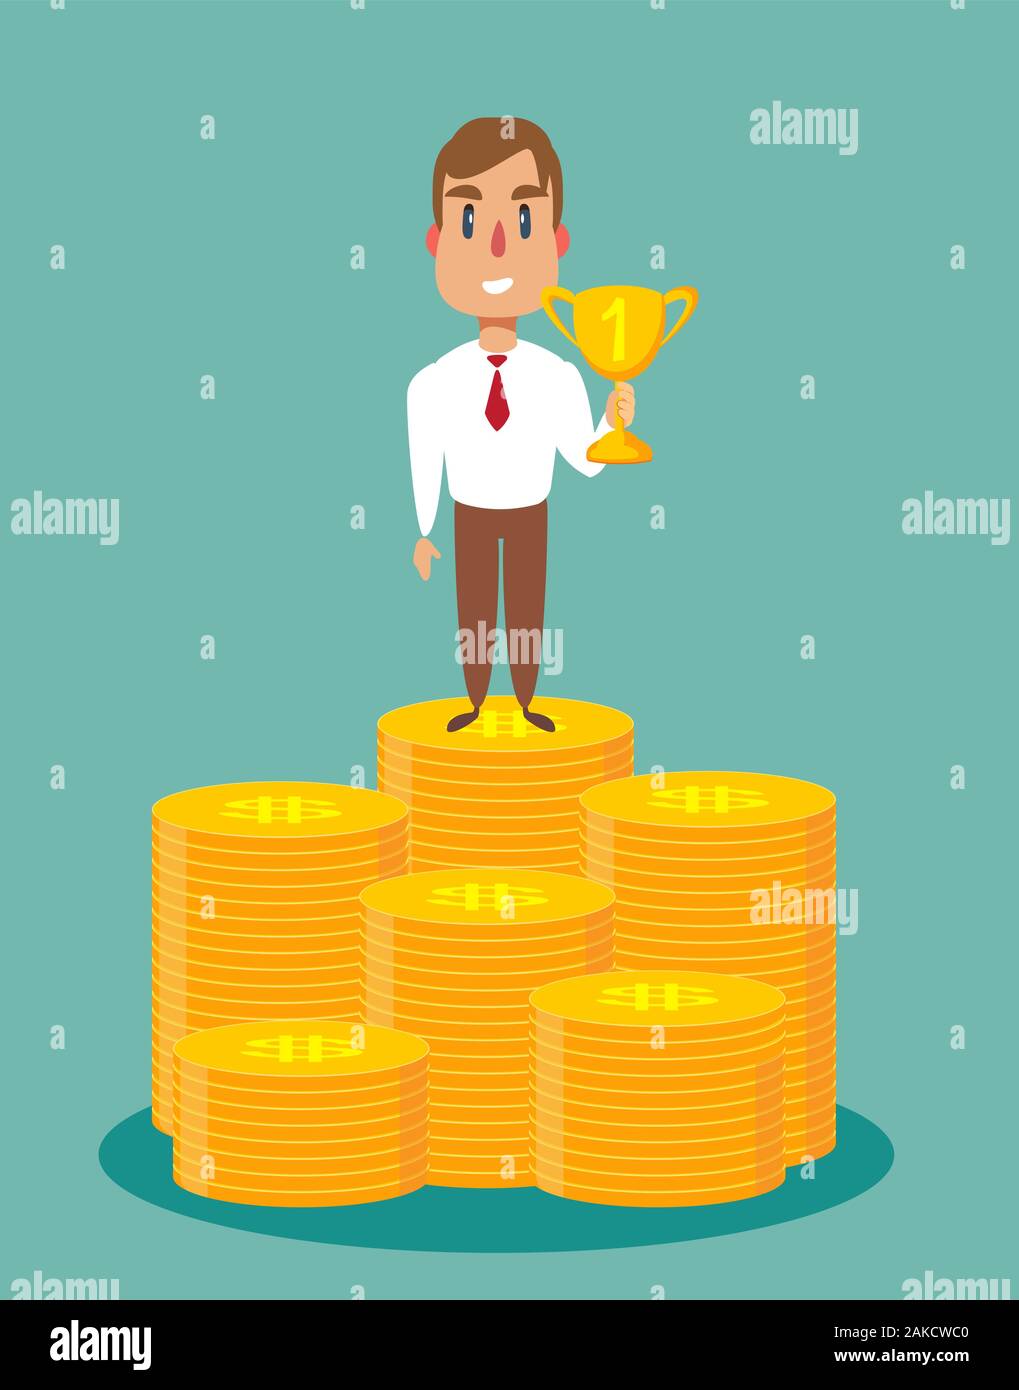 Businessman stands on large stack of coins. Stock Vector